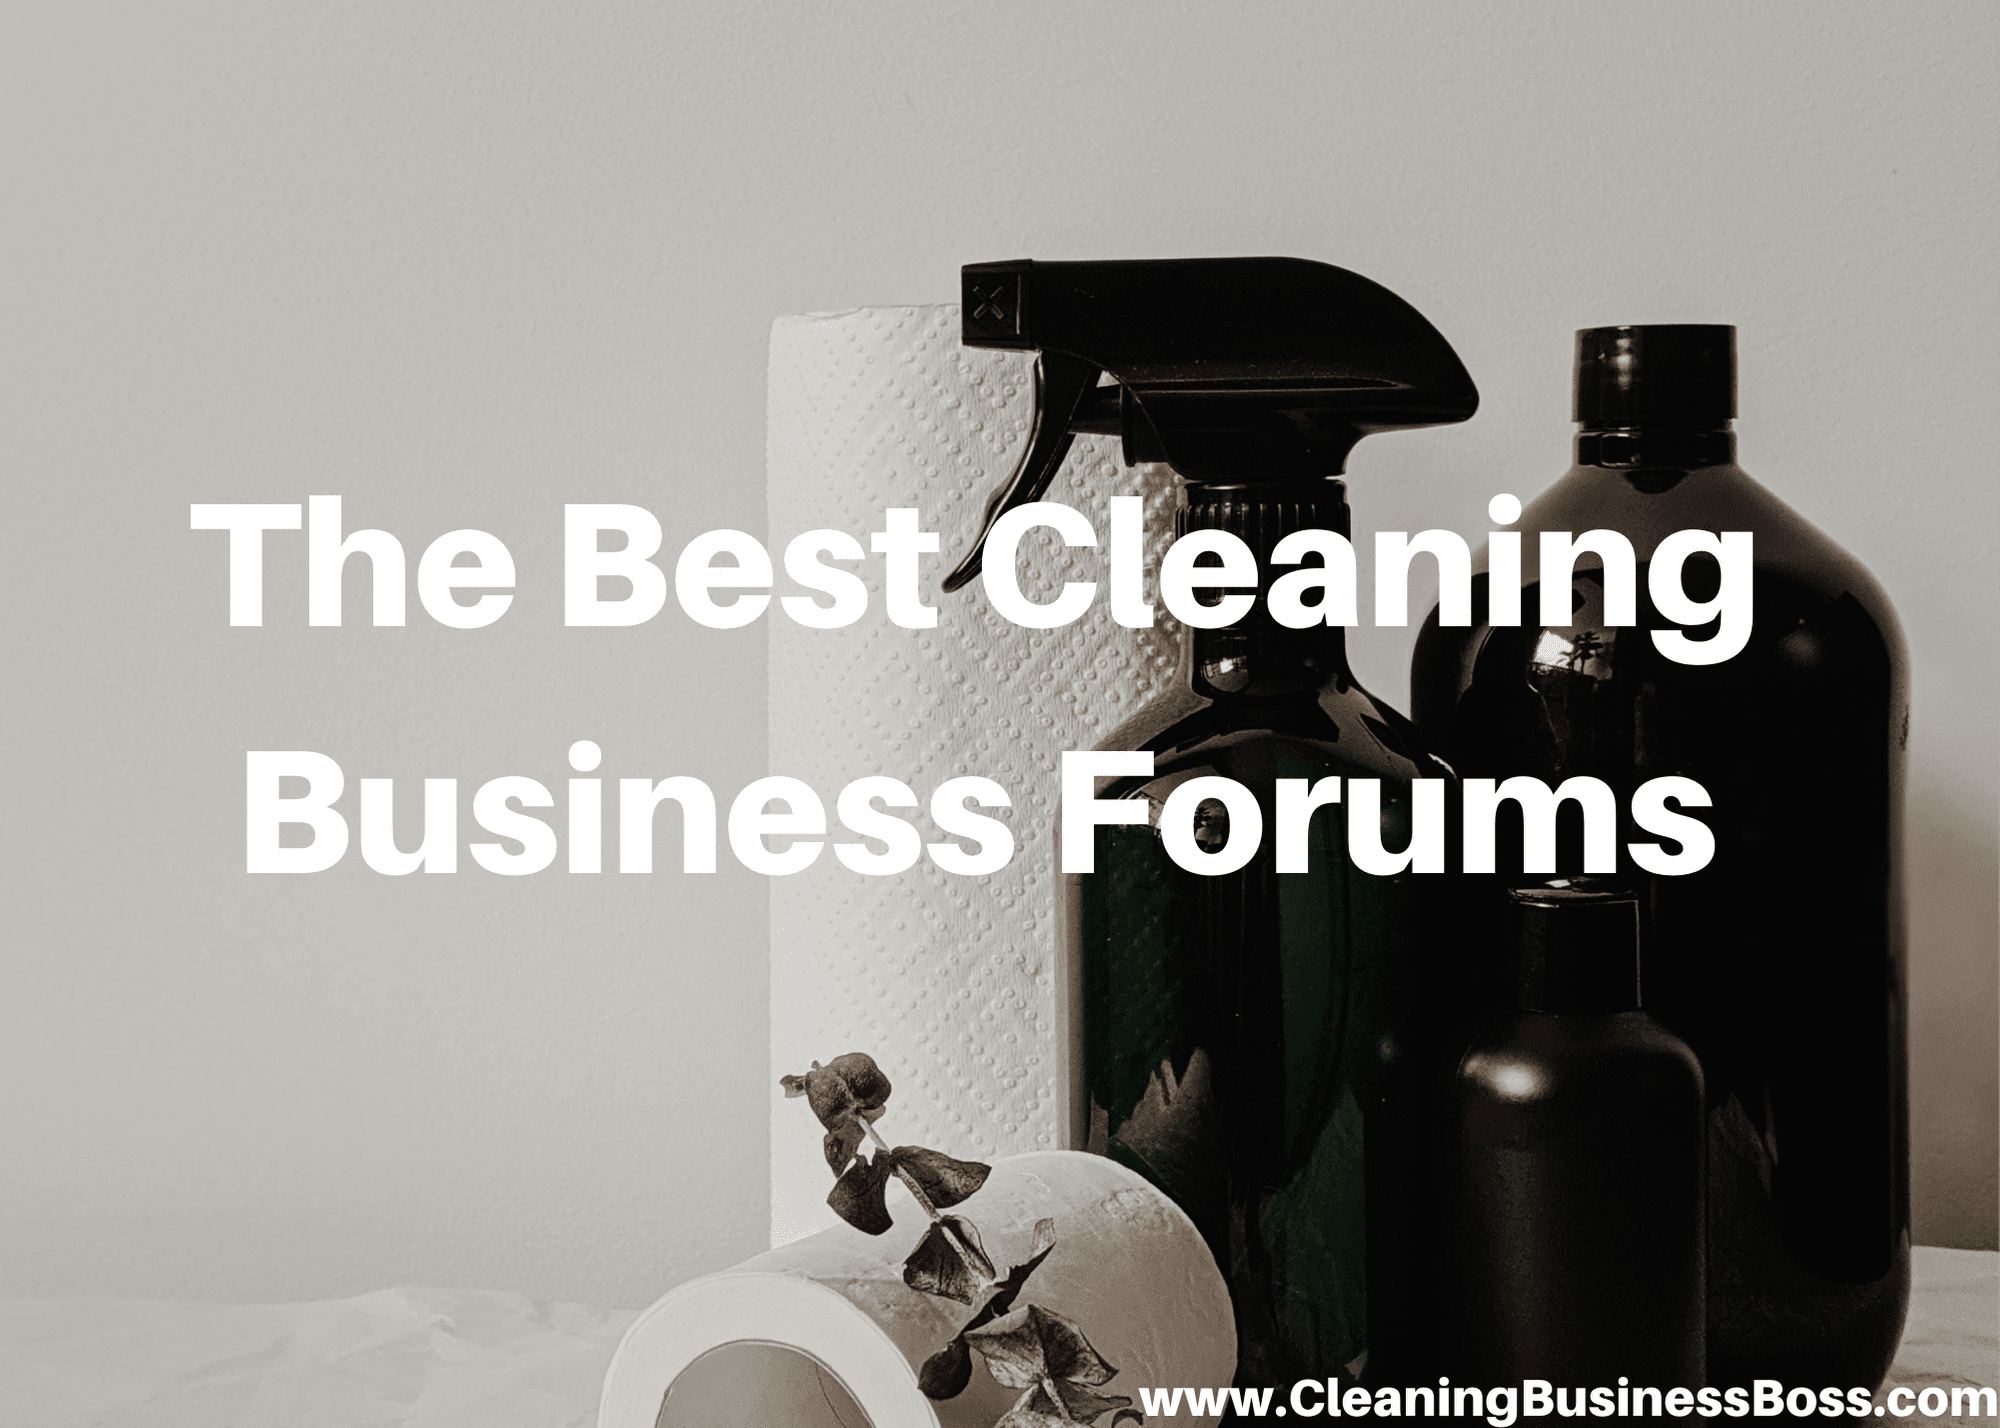 The Best Cleaning Business Forums